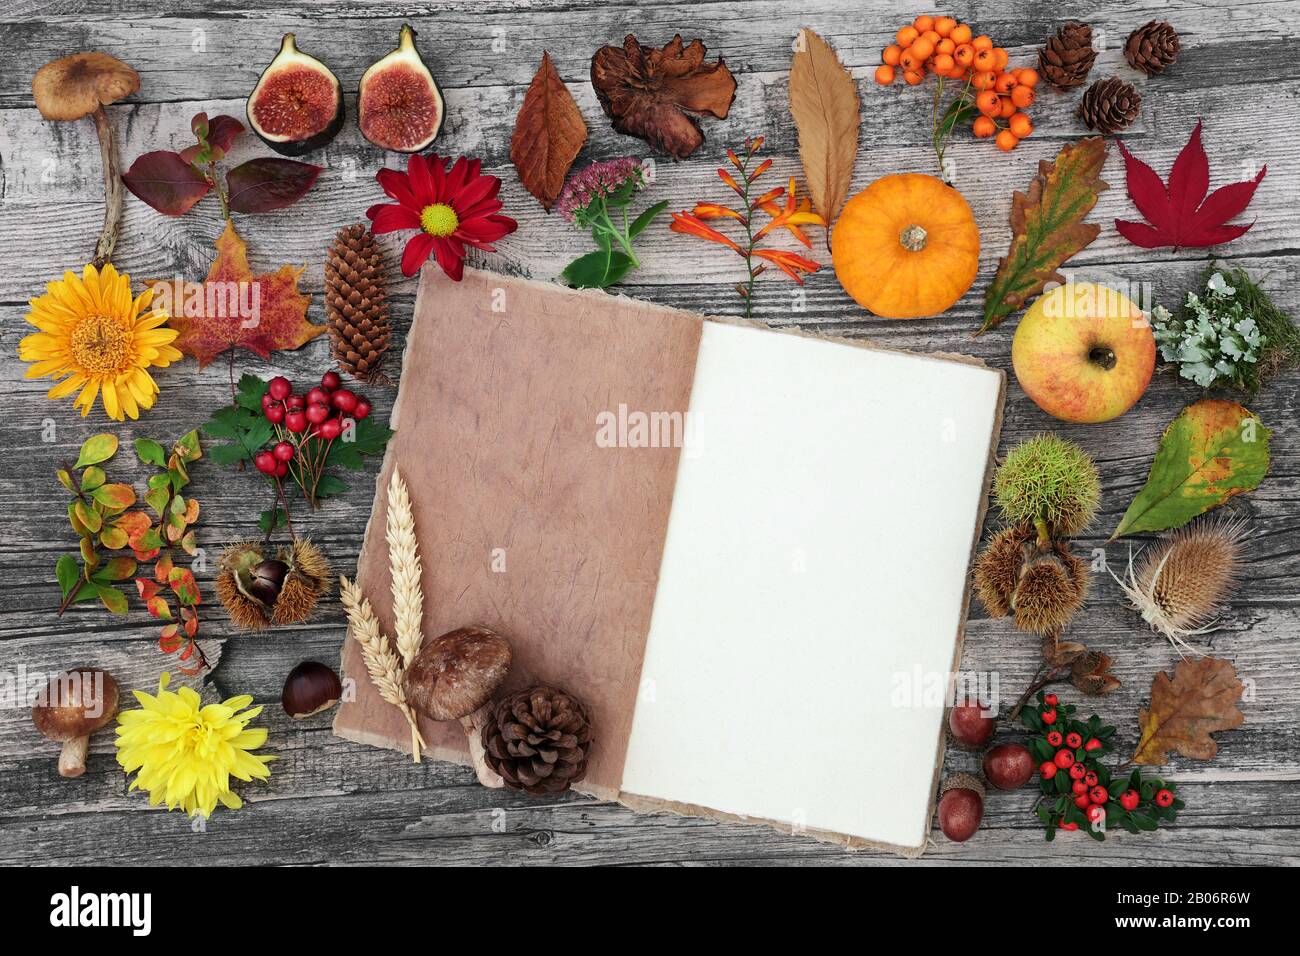 Autumn nature study composition with food, flora and fauna with old hemp notebook  on rustic wood background. Top view. Stock Photo